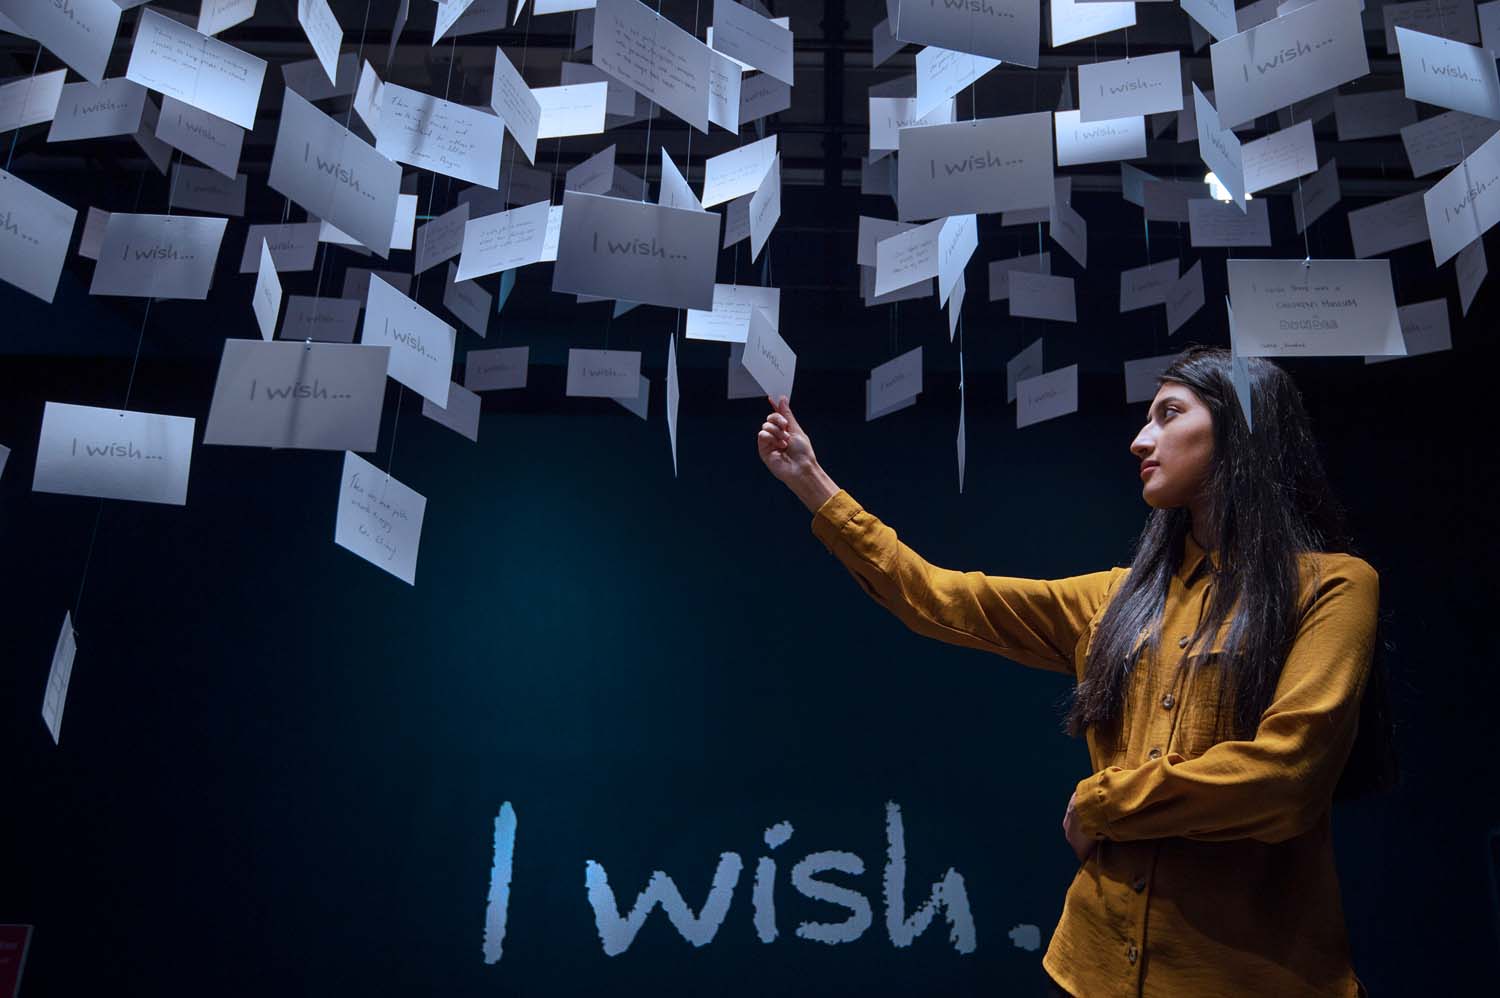 A girl in a yellow shirt looks at white postcards hanging from the ceiling in a dark room. The phrase "I wish" is written in large white letters on the wall behind her.